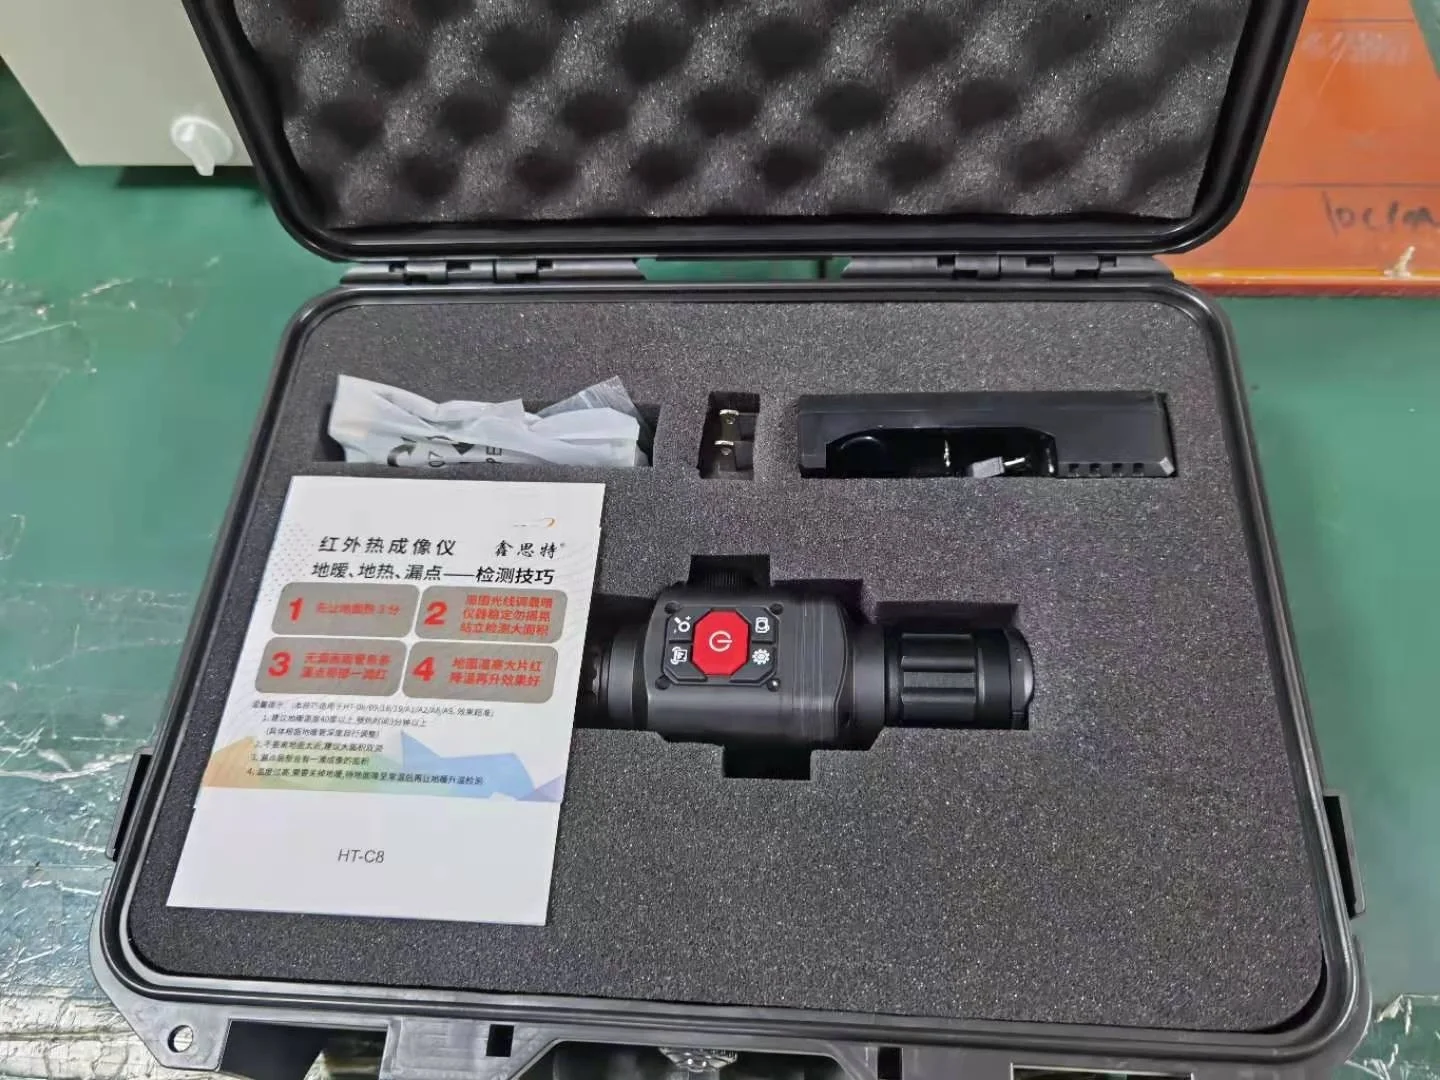 
2021 New thermal imaging Telescope/Can detect more than 1000 meters/very clear/hunting night vision device 